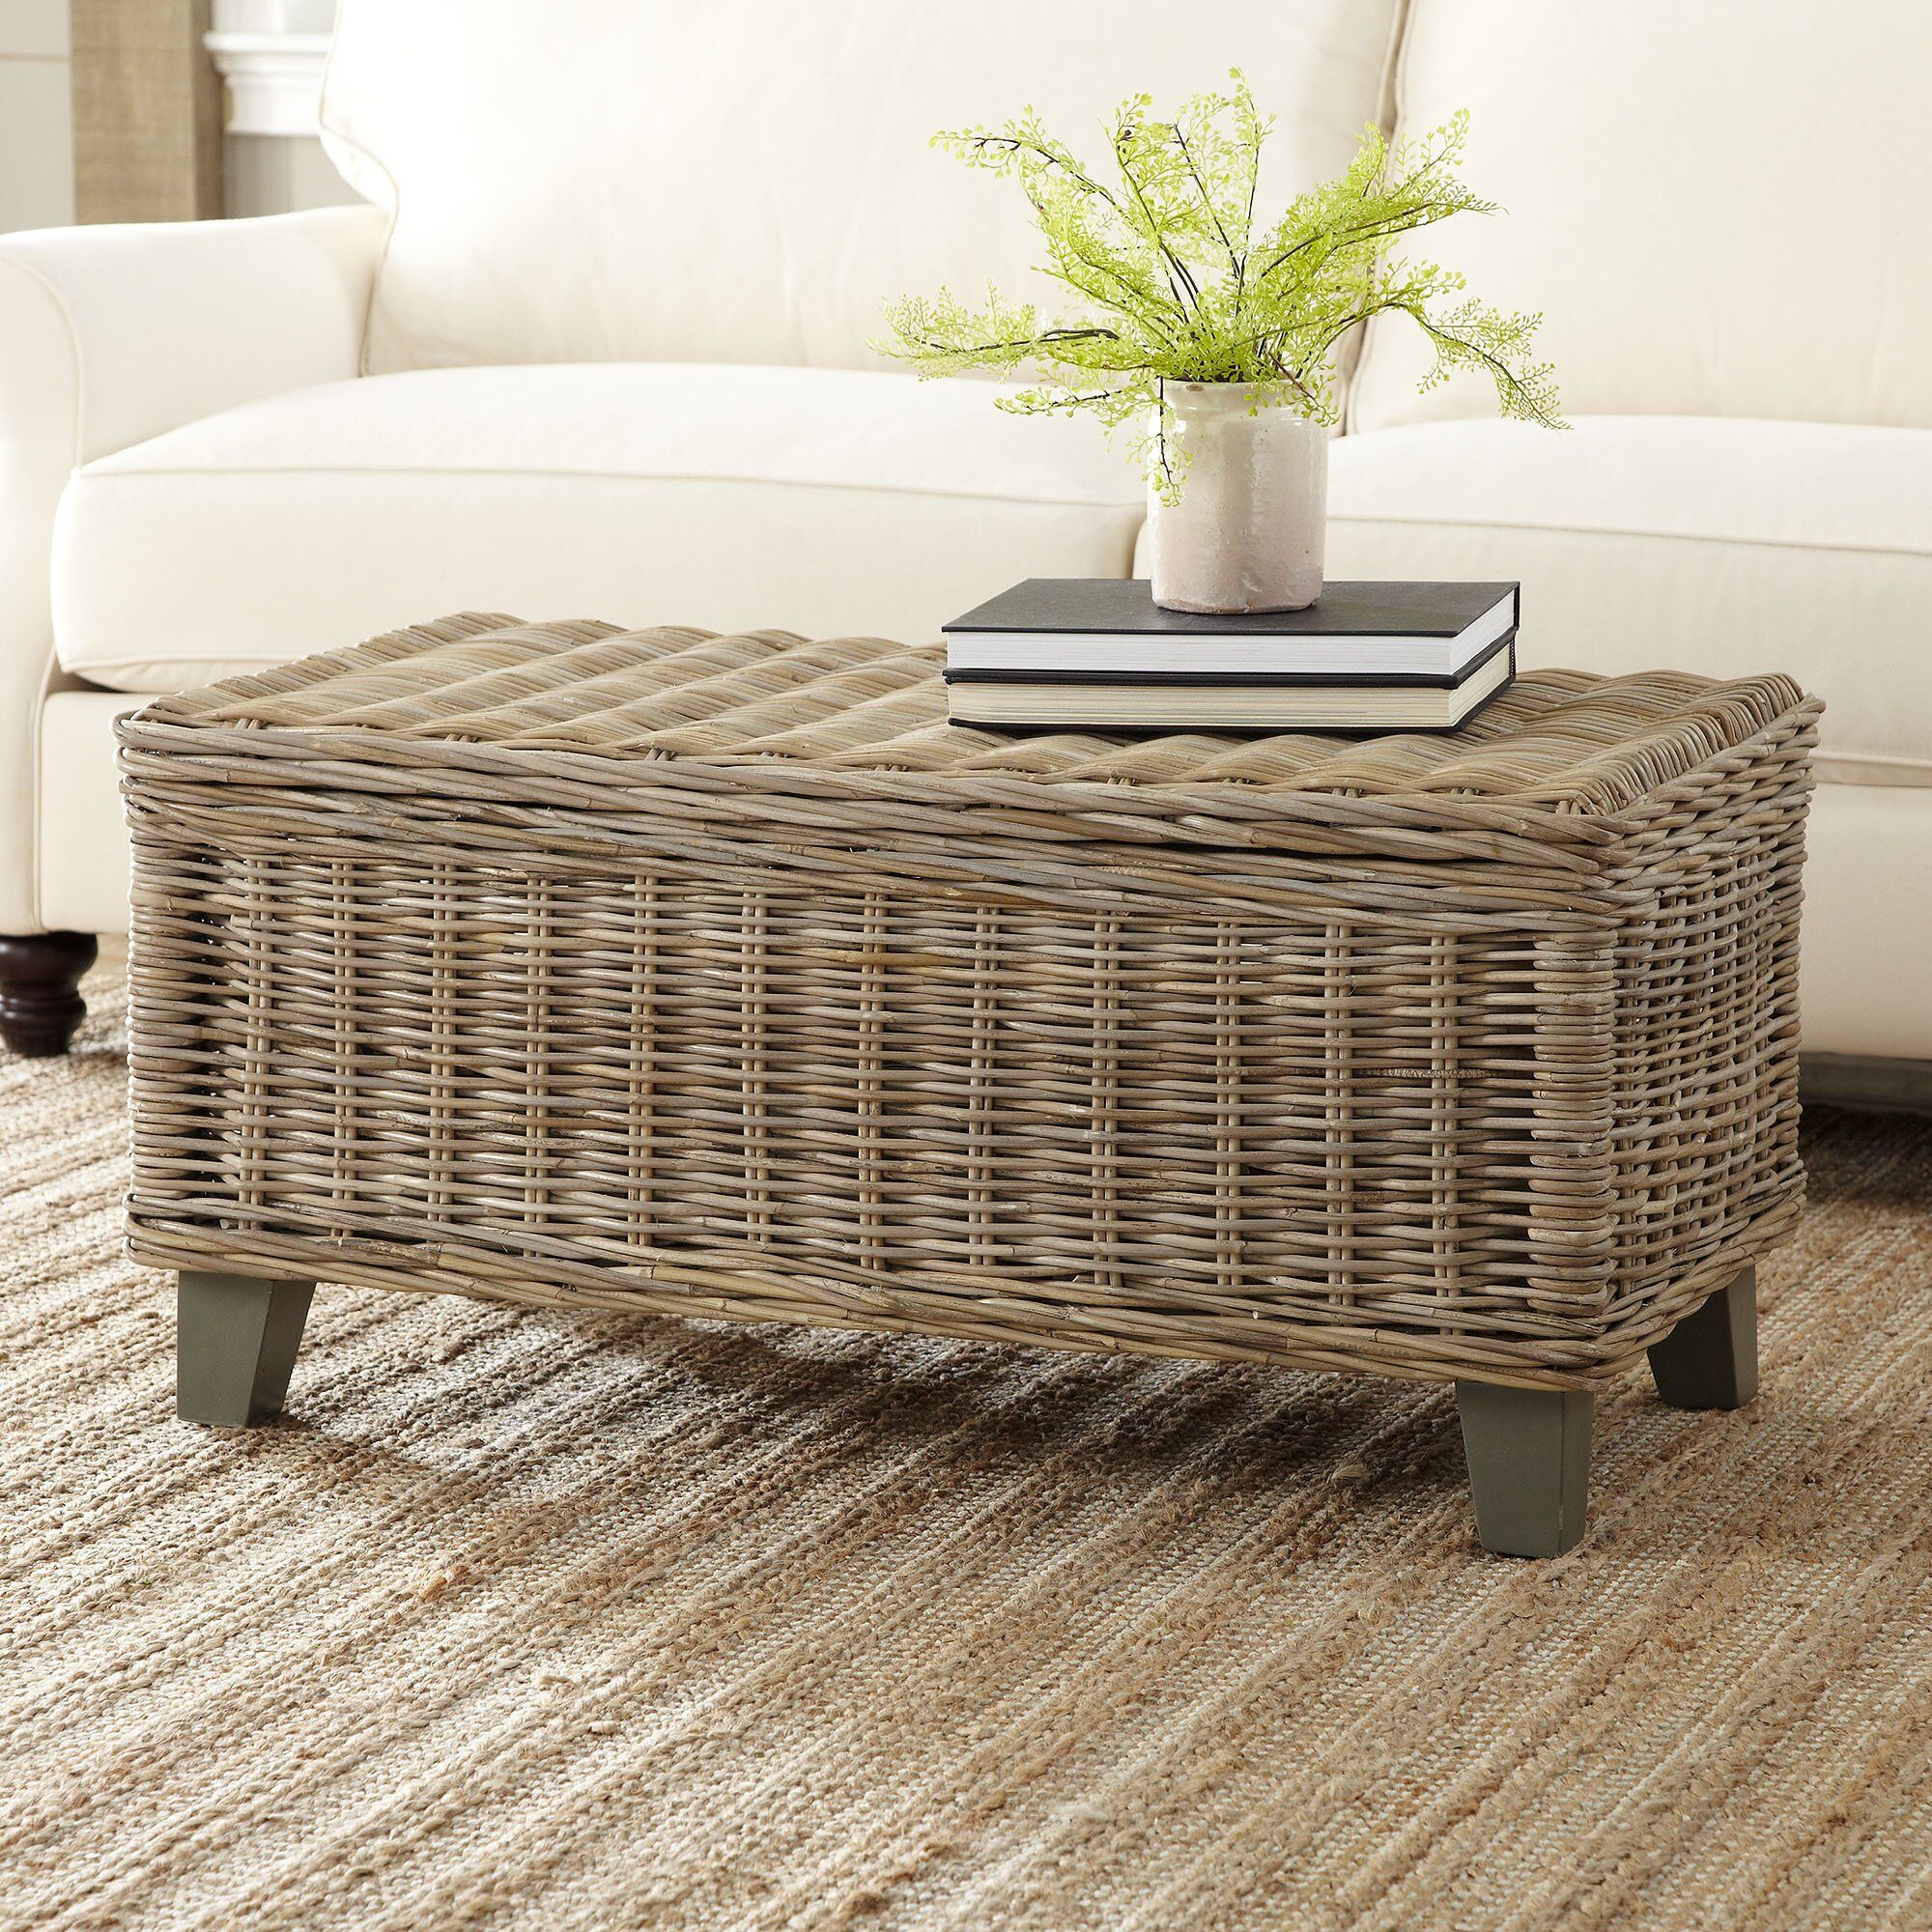 Rivera Rattan Coffee Table | Wayfair Throughout Rattan Coffee Tables (View 3 of 15)